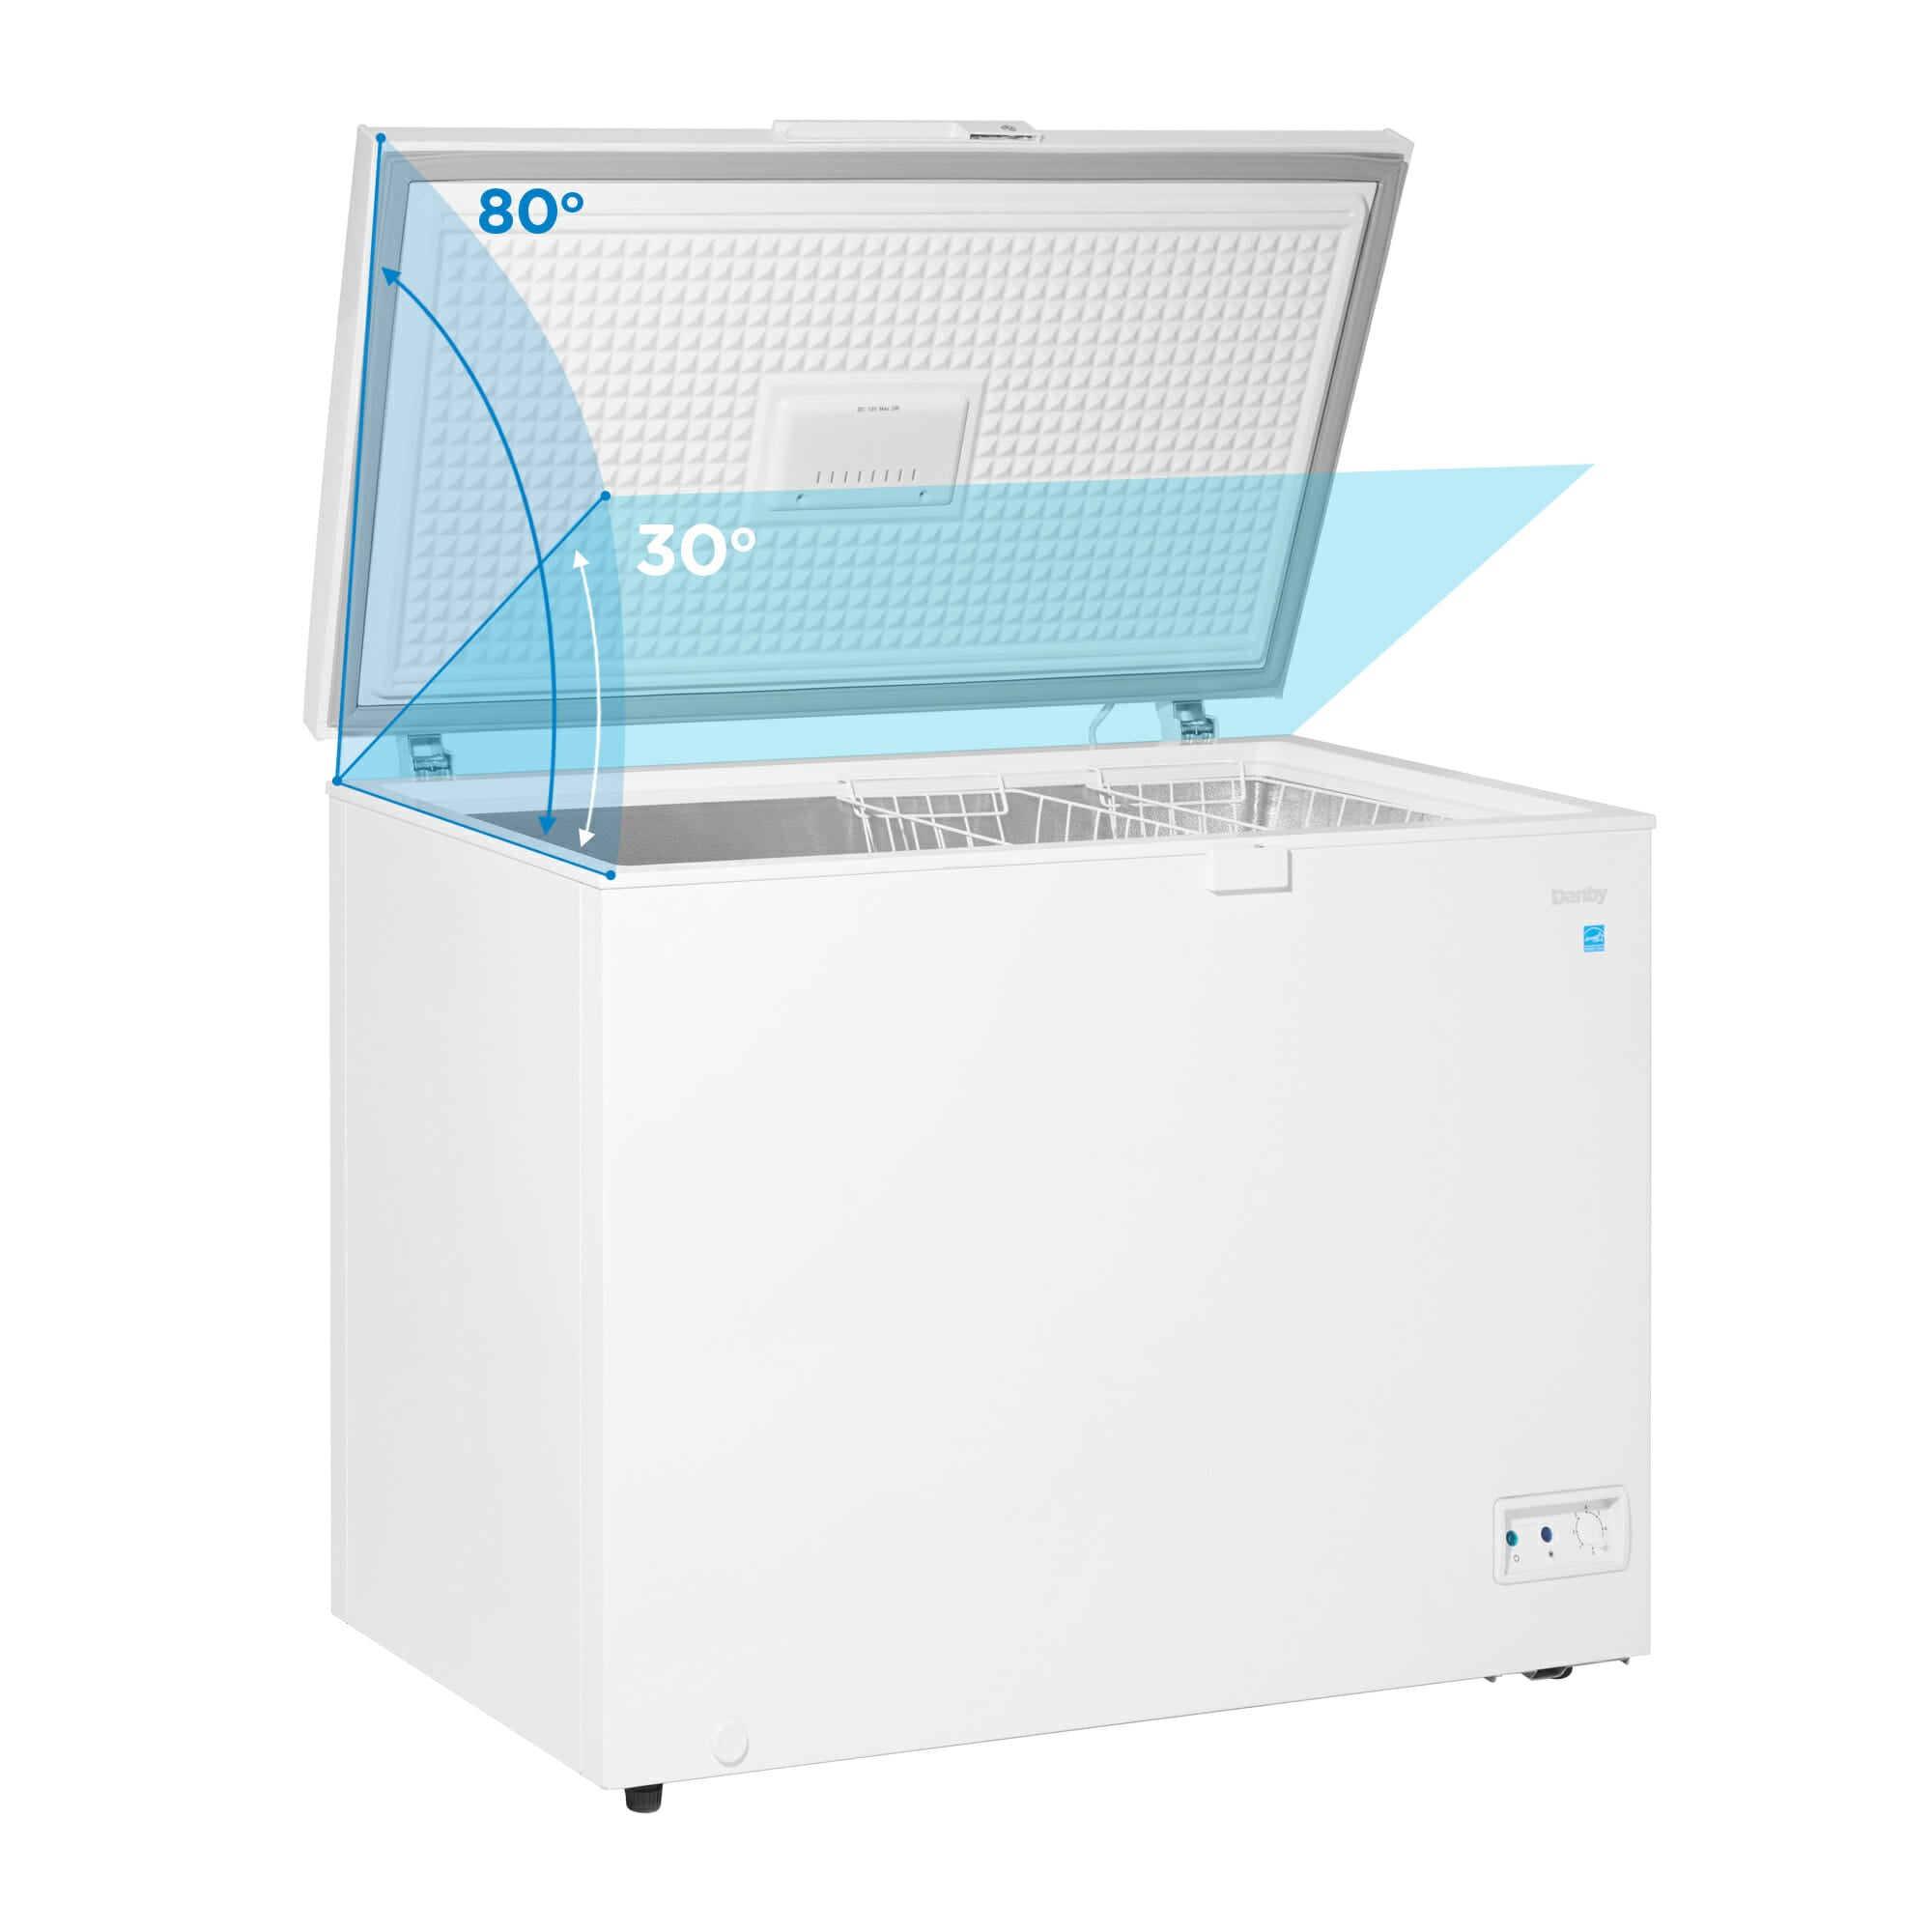 Danby - 10 cu. Ft  Chest Freezer in White - DCF100A5WDB